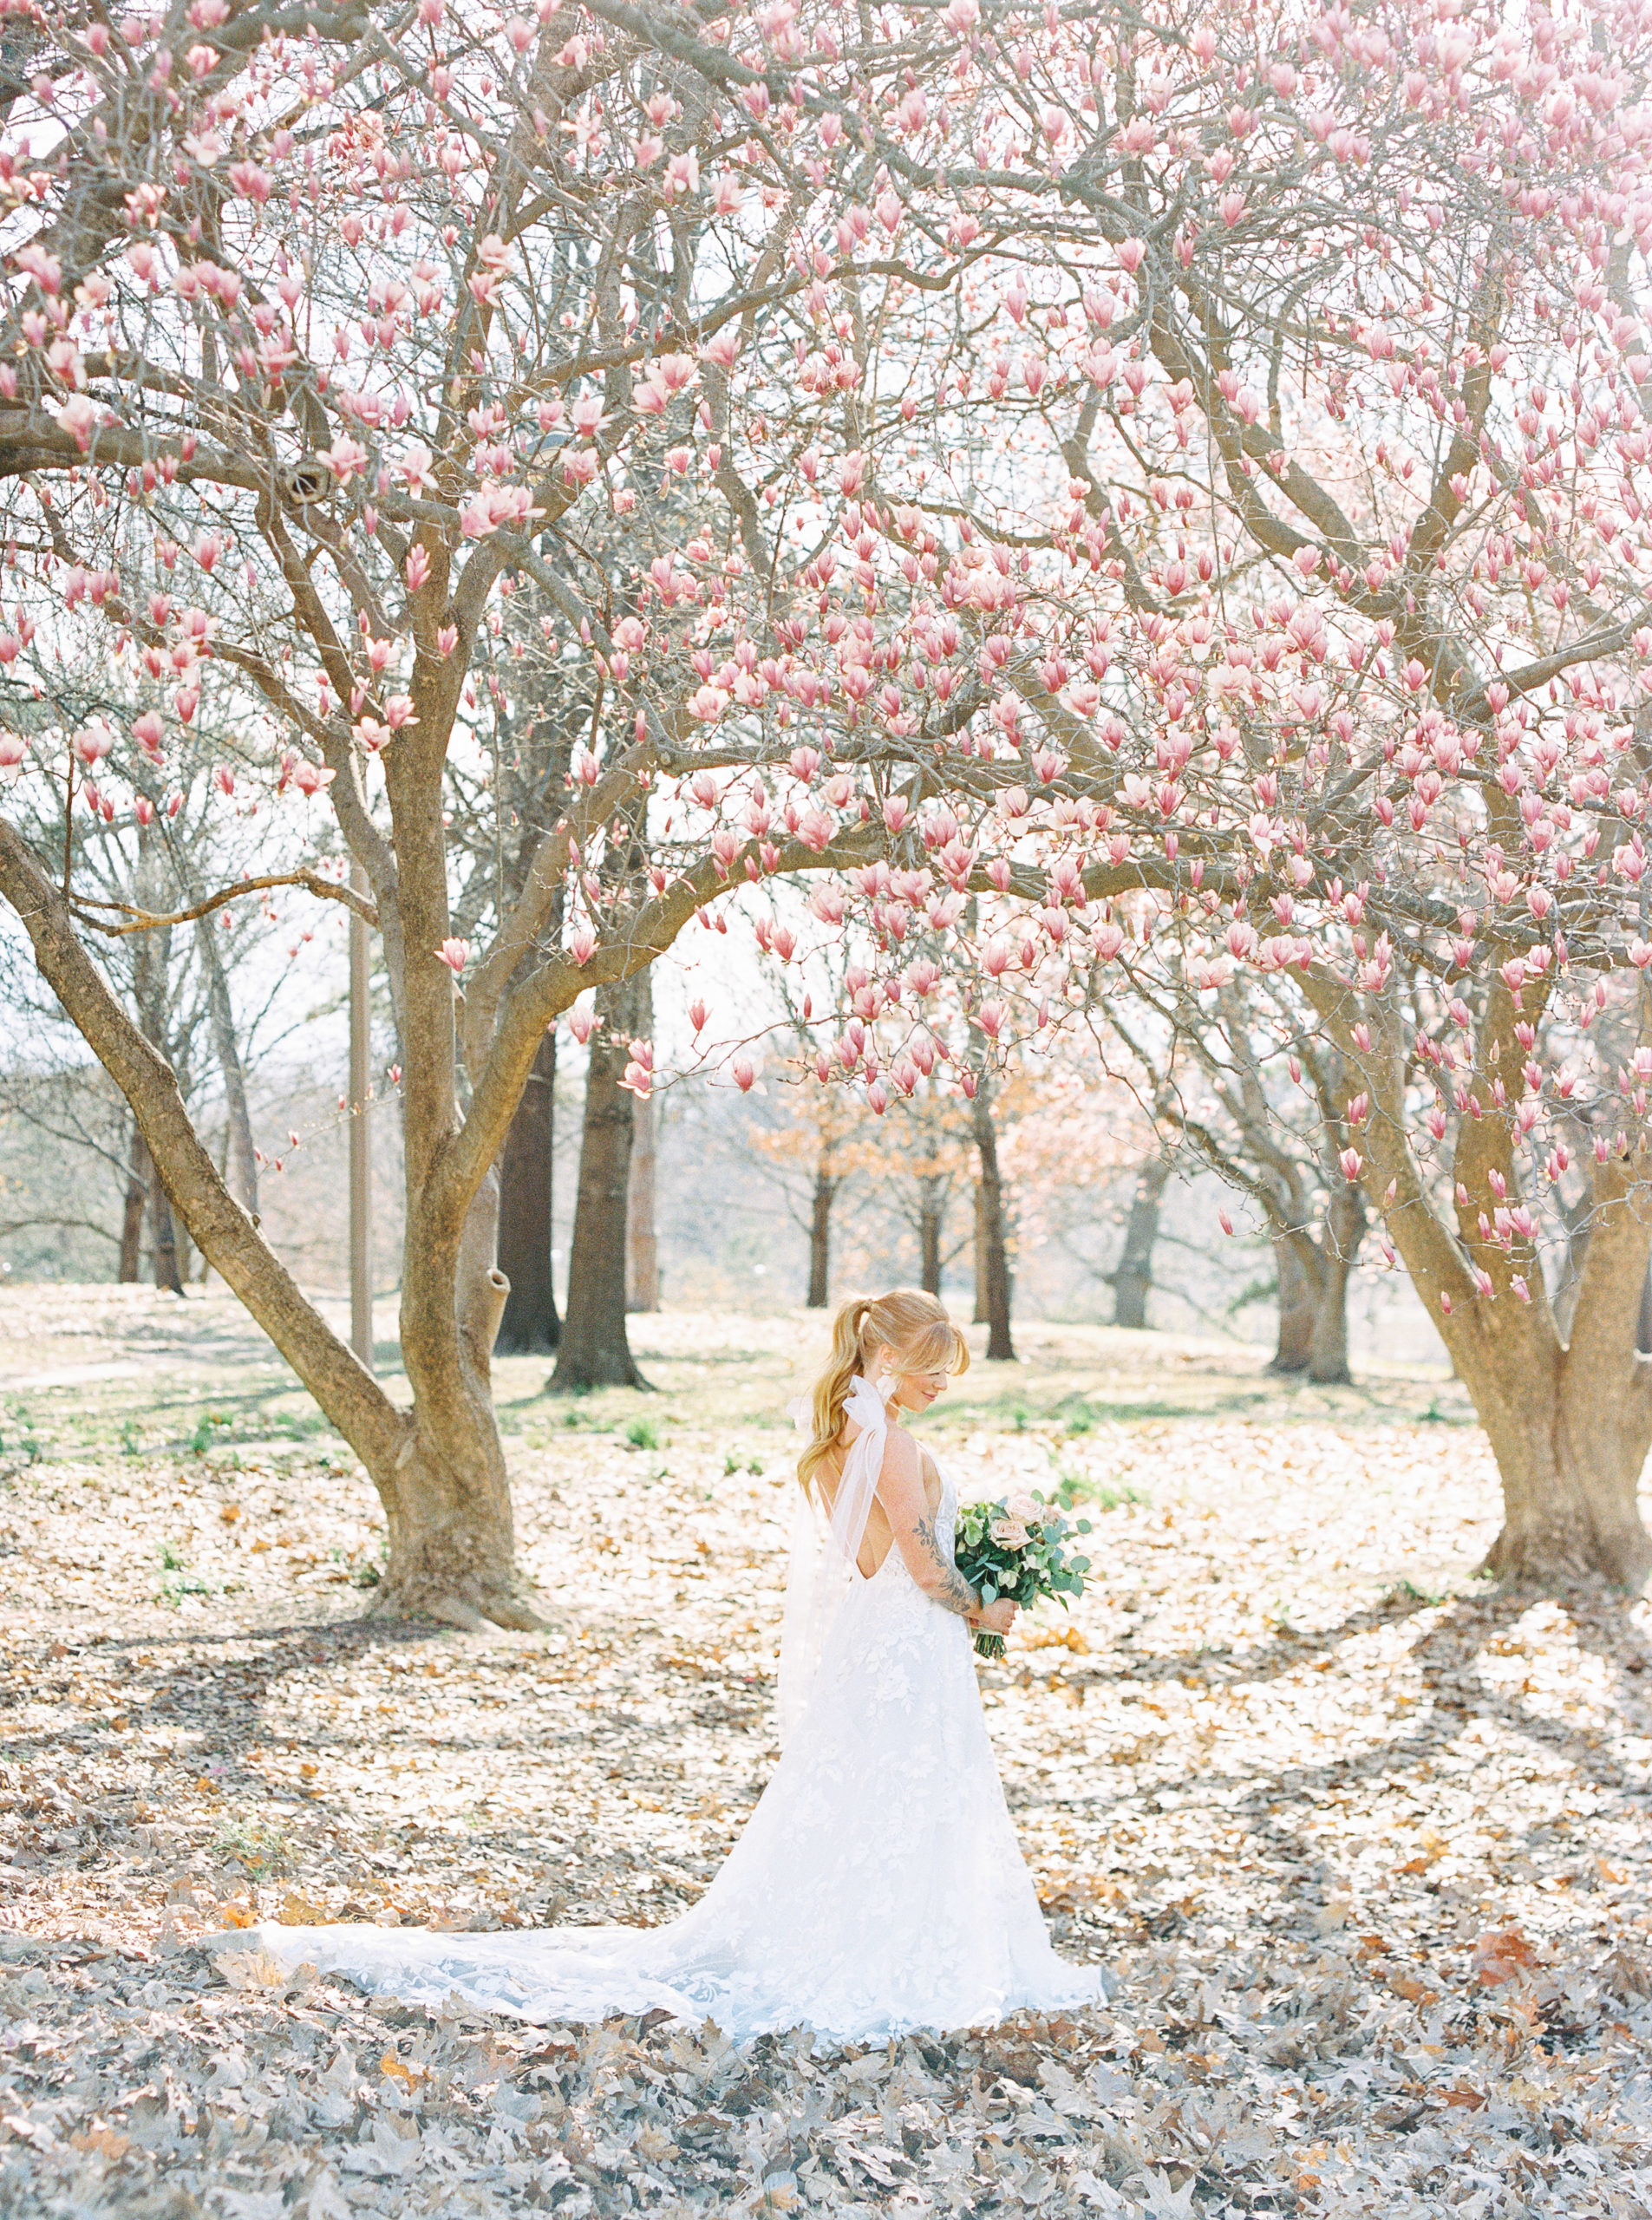 Made with love elsie gown for fine art Spring Floral Bridal Inspiration session on film in St Louis Forest Park